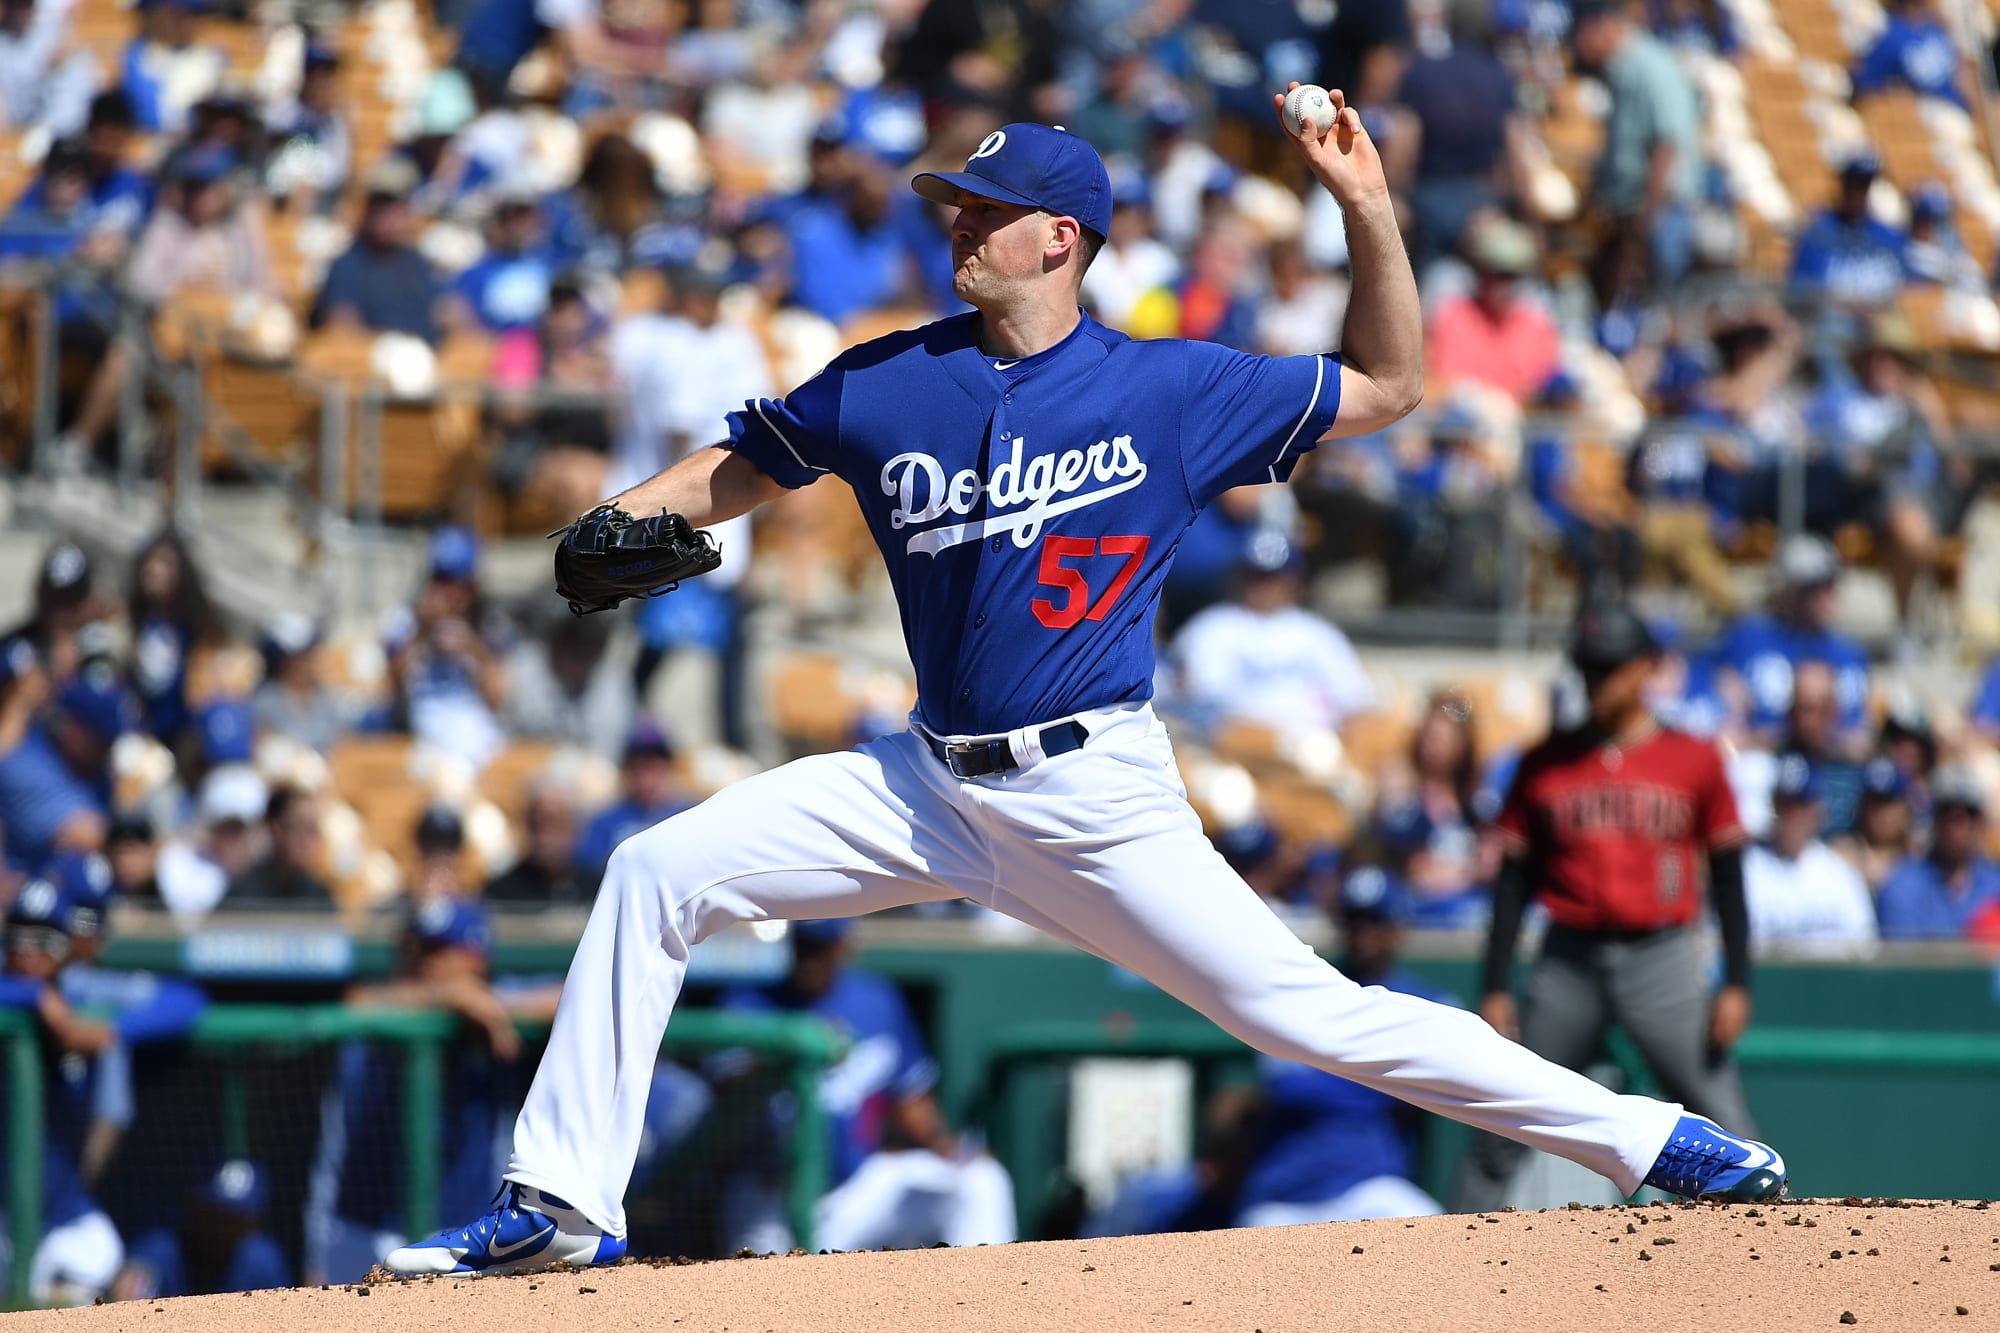 The Dodgers starting pitching depth will force a trade this season